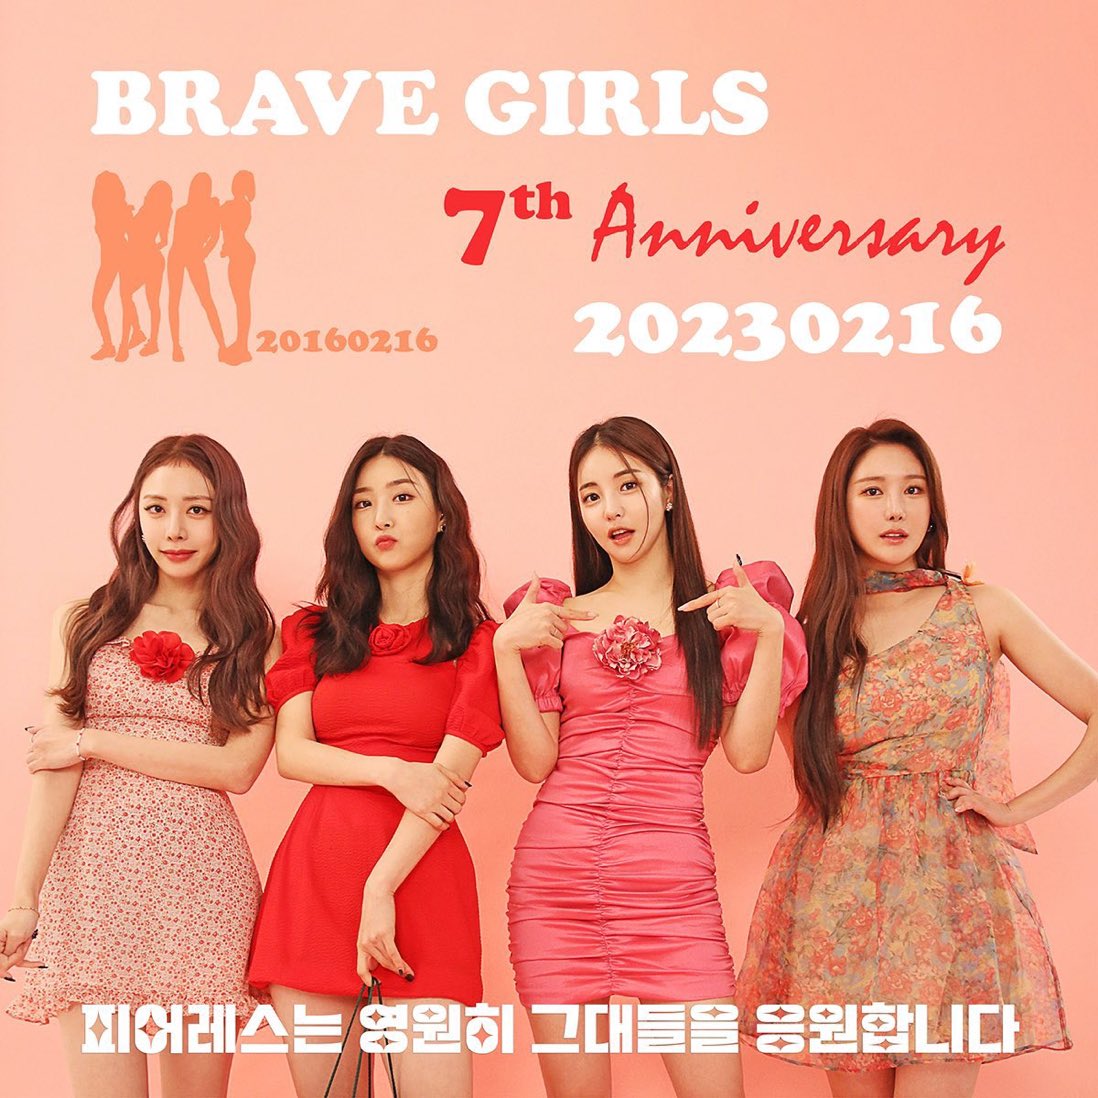 Queens 👑 
Thank you for all the memories <3 
#BraveGirls #Fearless
#7th_Anniversary
#Minyoung #Yujeong
#Eunji #Yuna
#AlwaysWithBraveGirls
#Fear7essWithBraveGirls